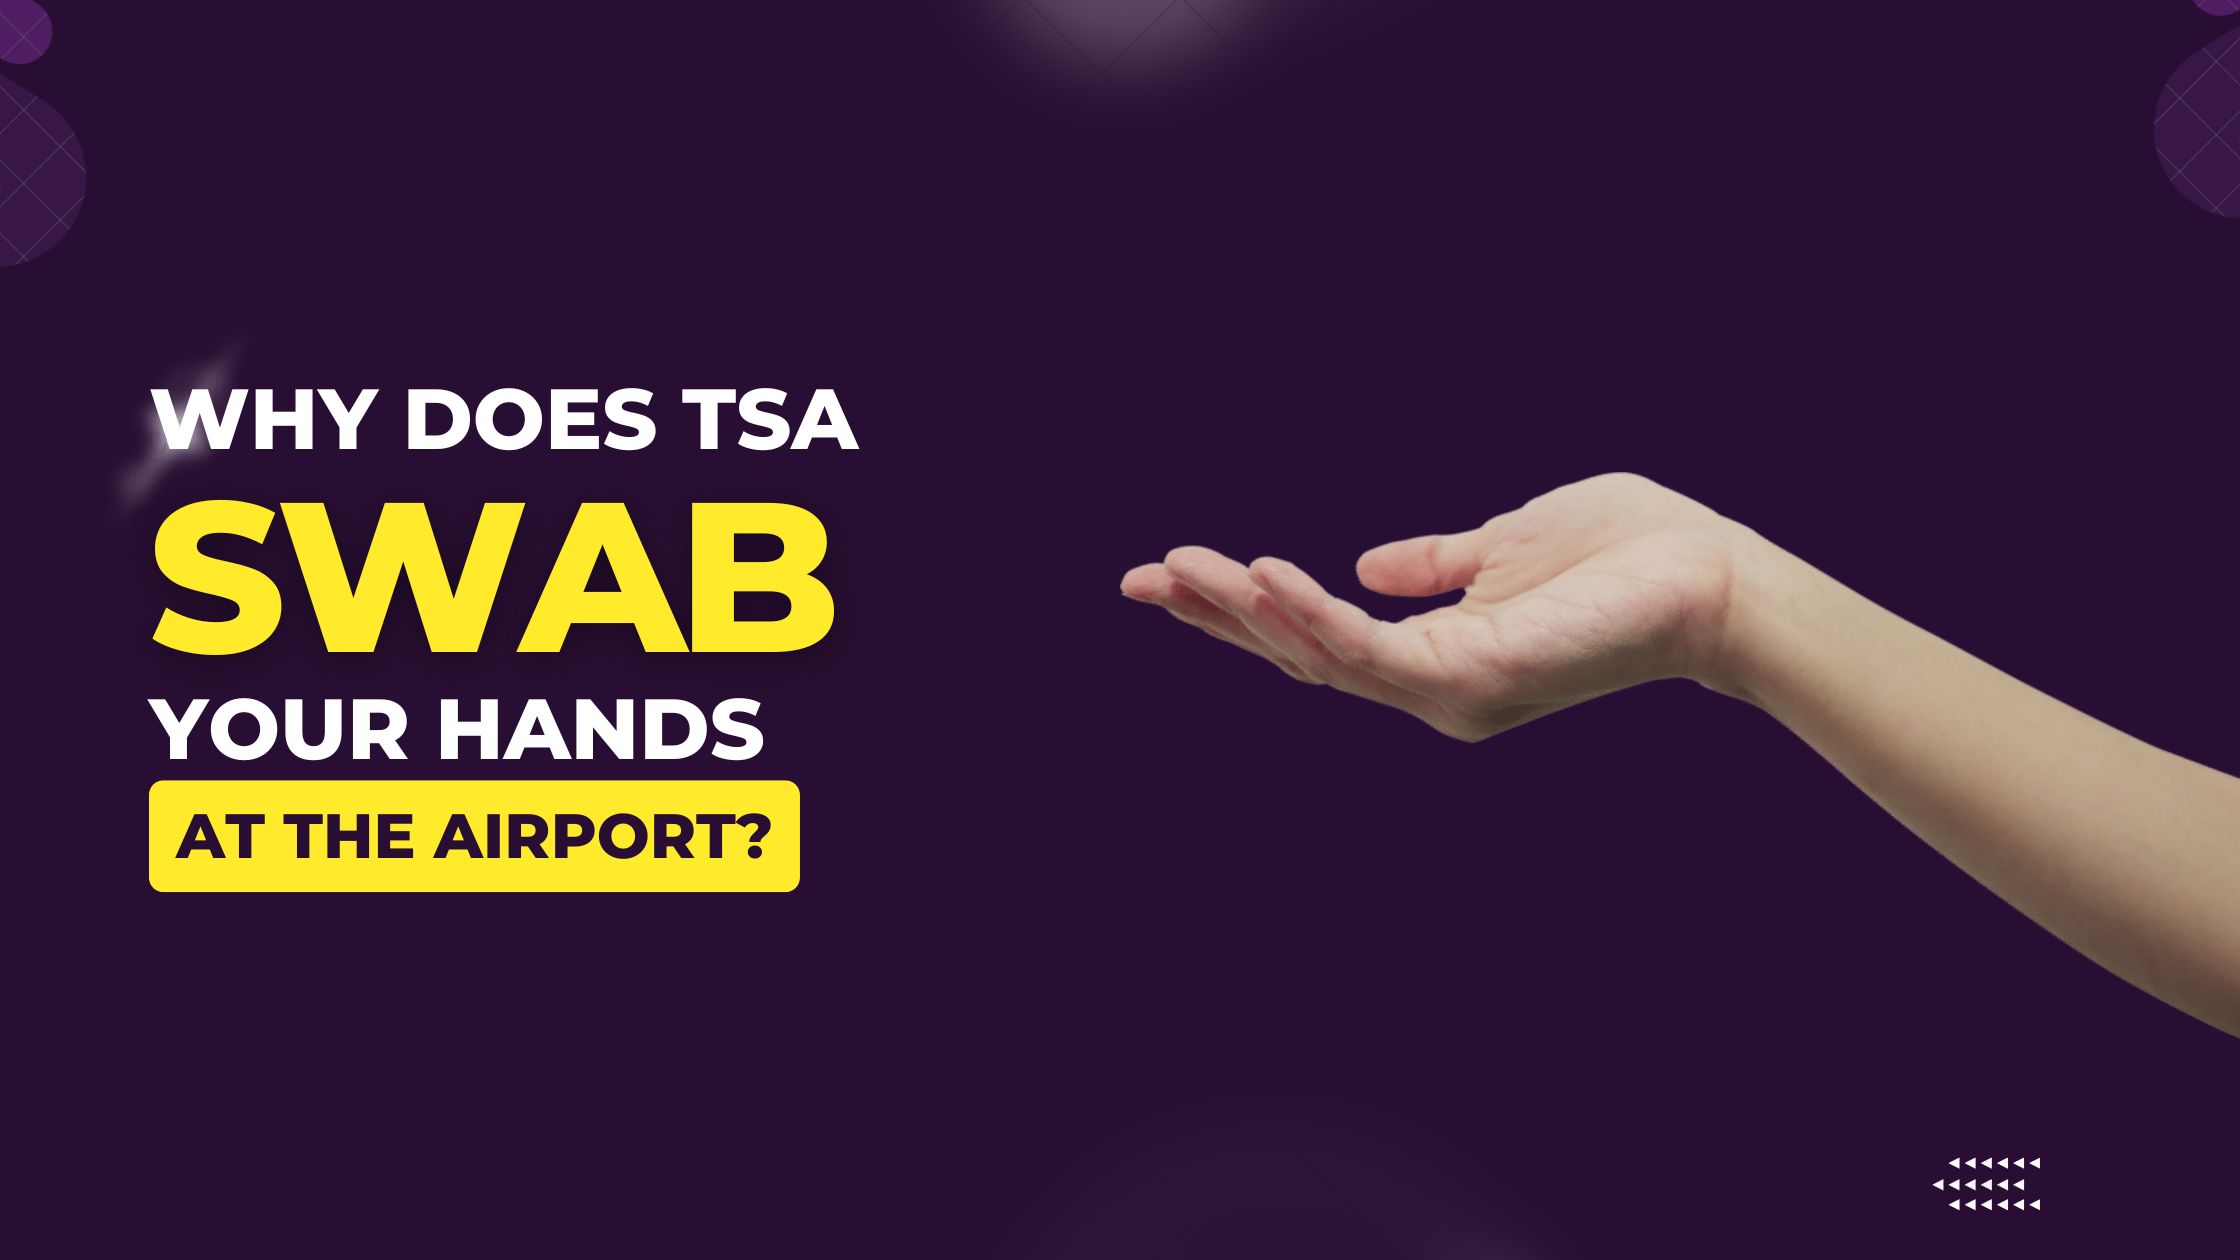 Why Does TSA Swab Your Hands At The Airport